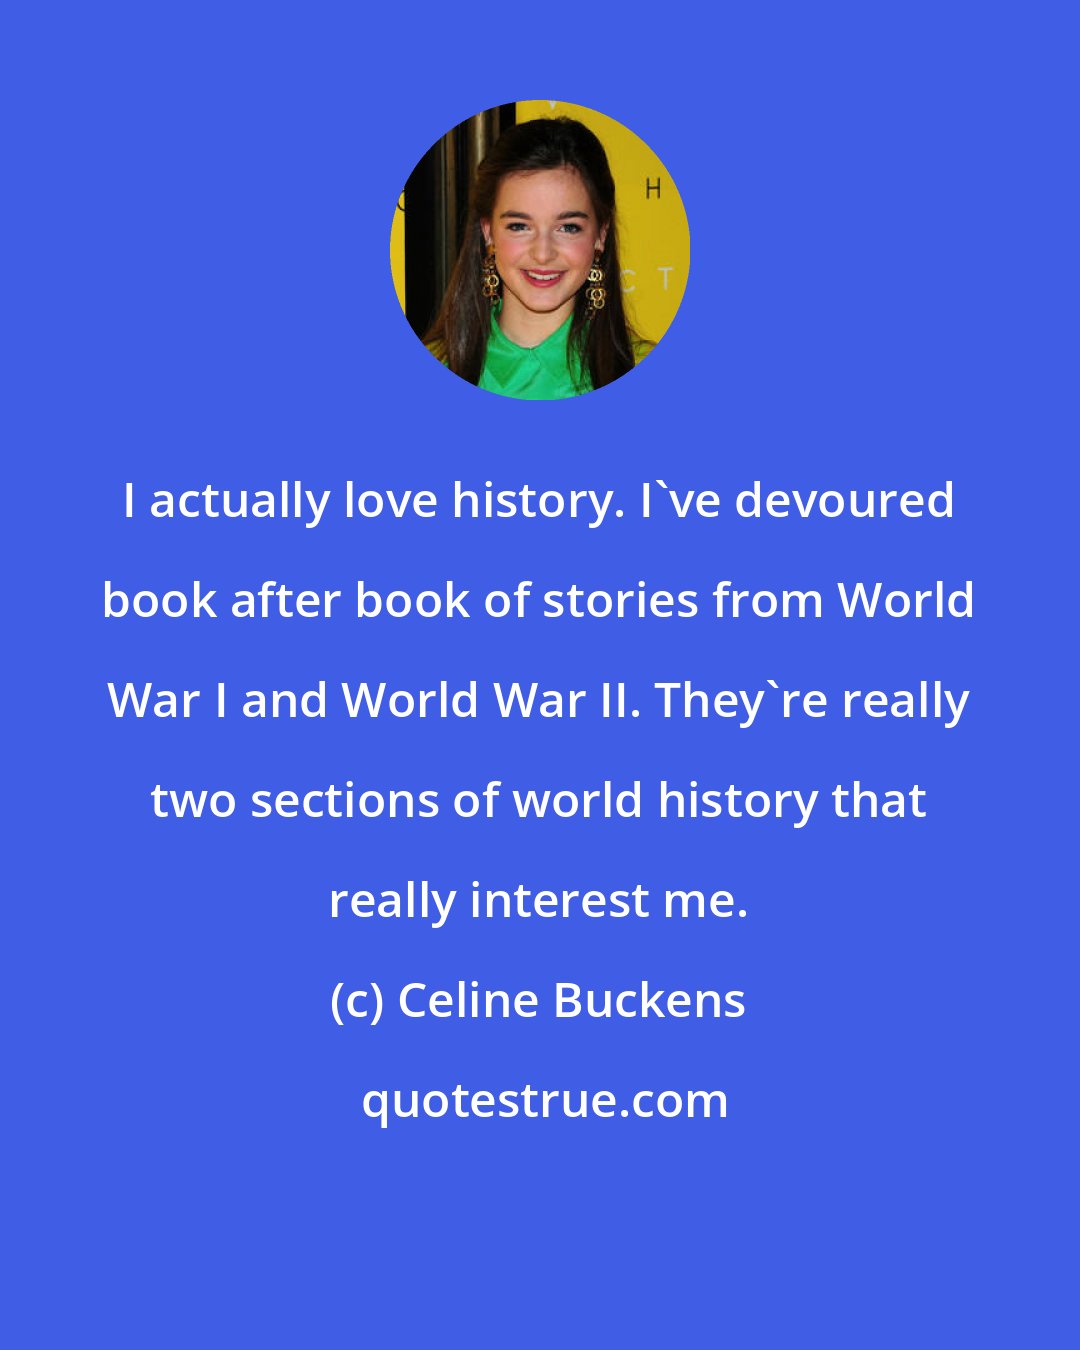 Celine Buckens: I actually love history. I've devoured book after book of stories from World War I and World War II. They're really two sections of world history that really interest me.